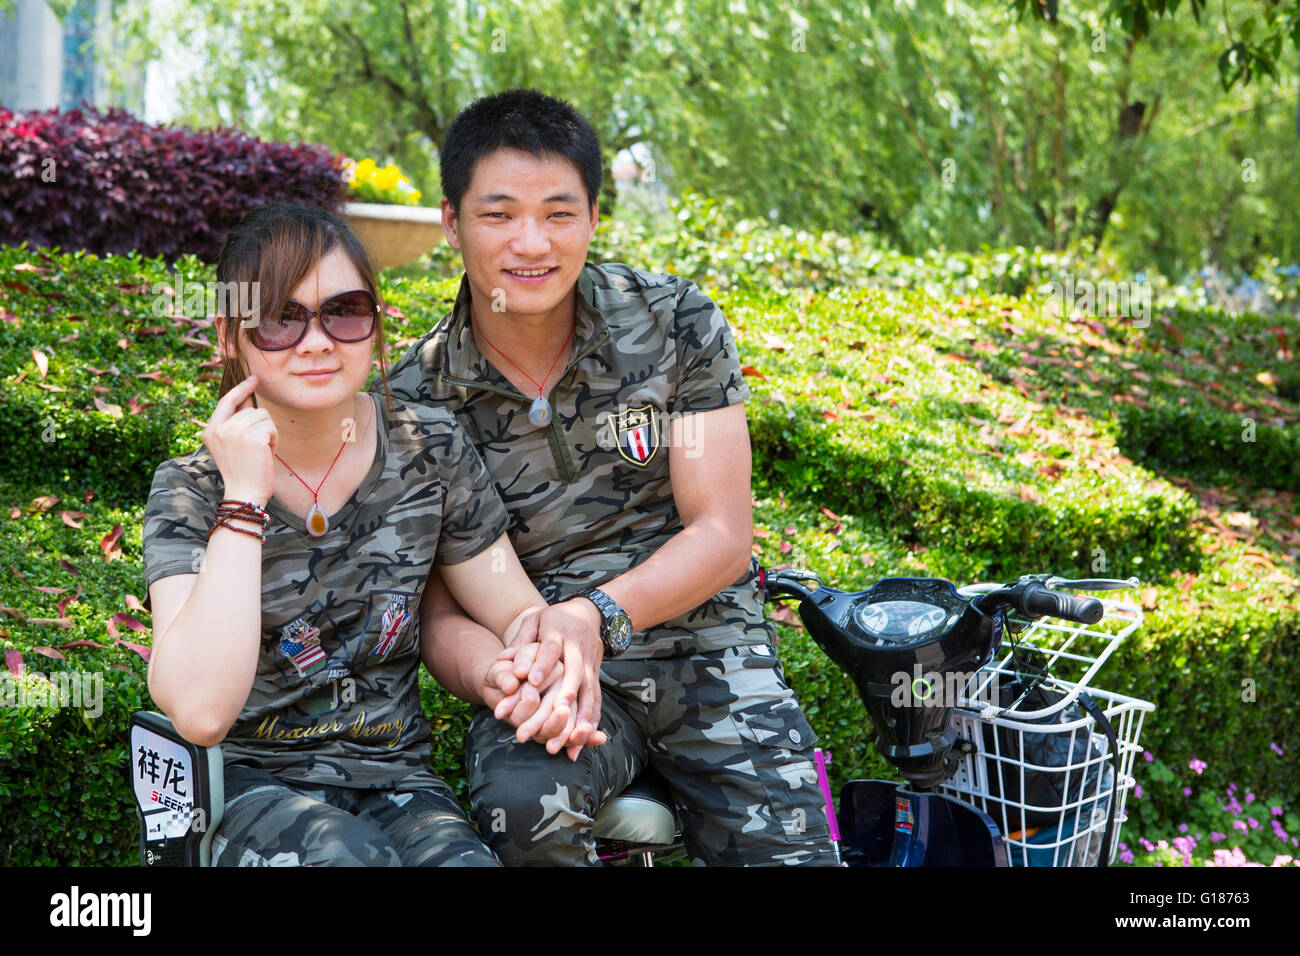 Young romantic Chinese couple on a scooter holding hands in the park wearing a military army uniform Stock Photo